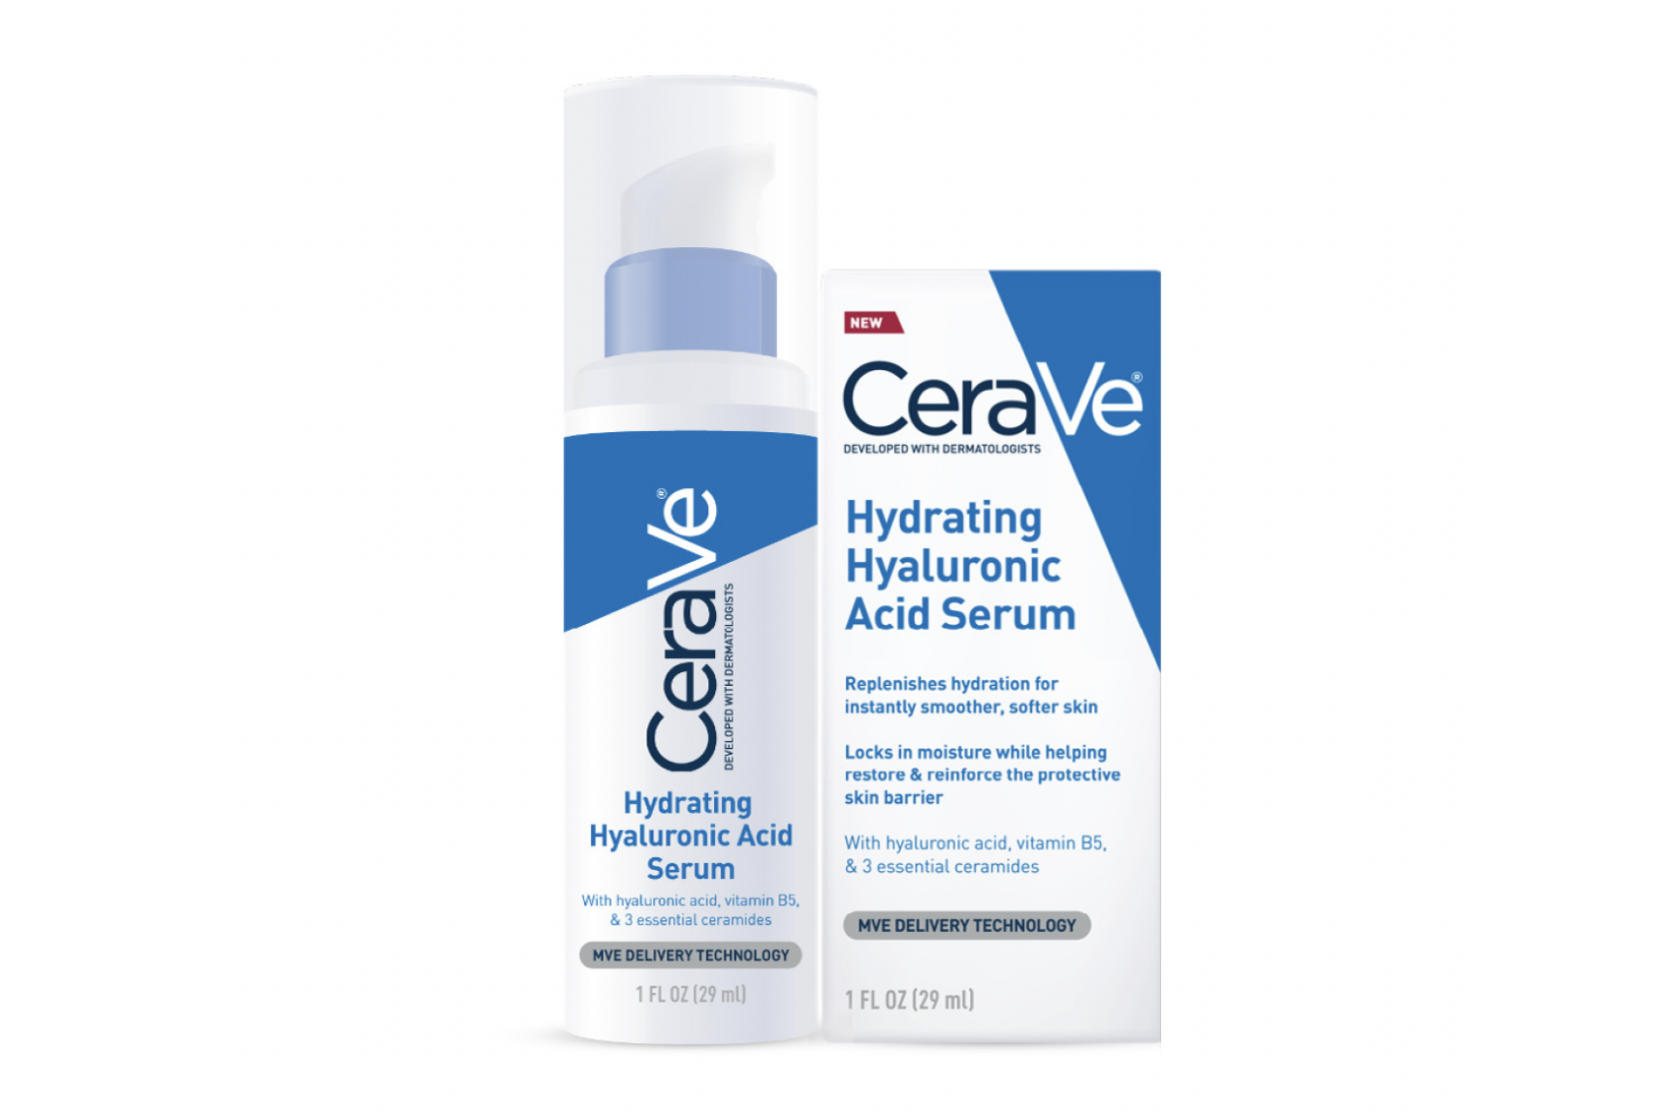 “CeraVe’s cult hyaluronic acid serum is finally in the UK – here’s what ...